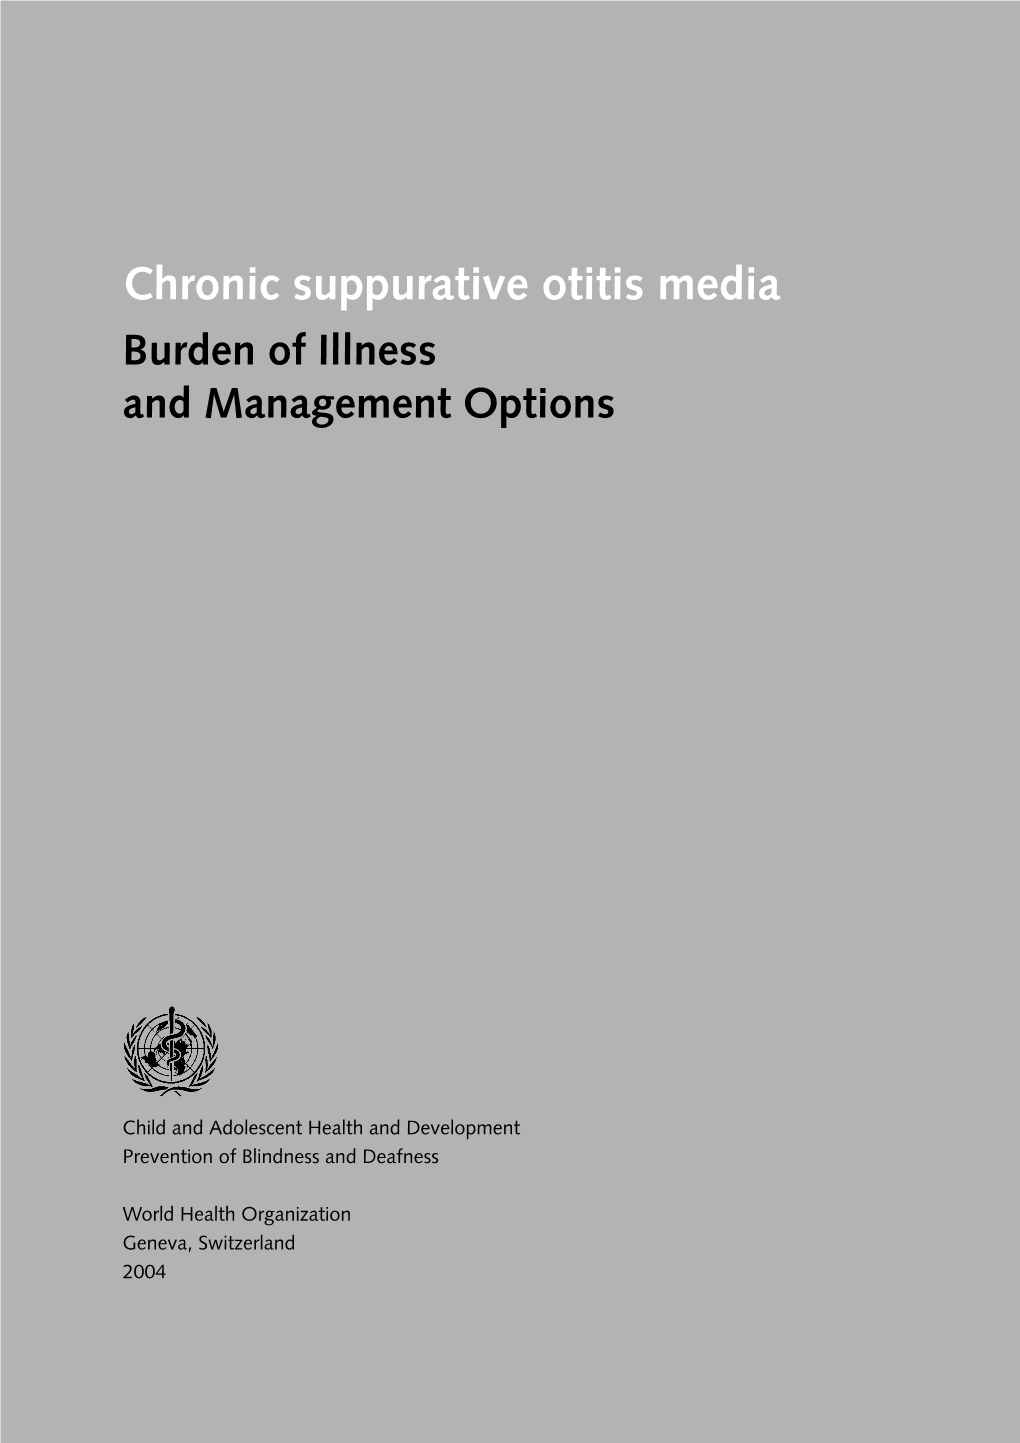 Chronic Suppurative Otitis Media: Burden of Illness and Management Options Or Bathing Also Leads to Intermittent and Unpleasant Discharges